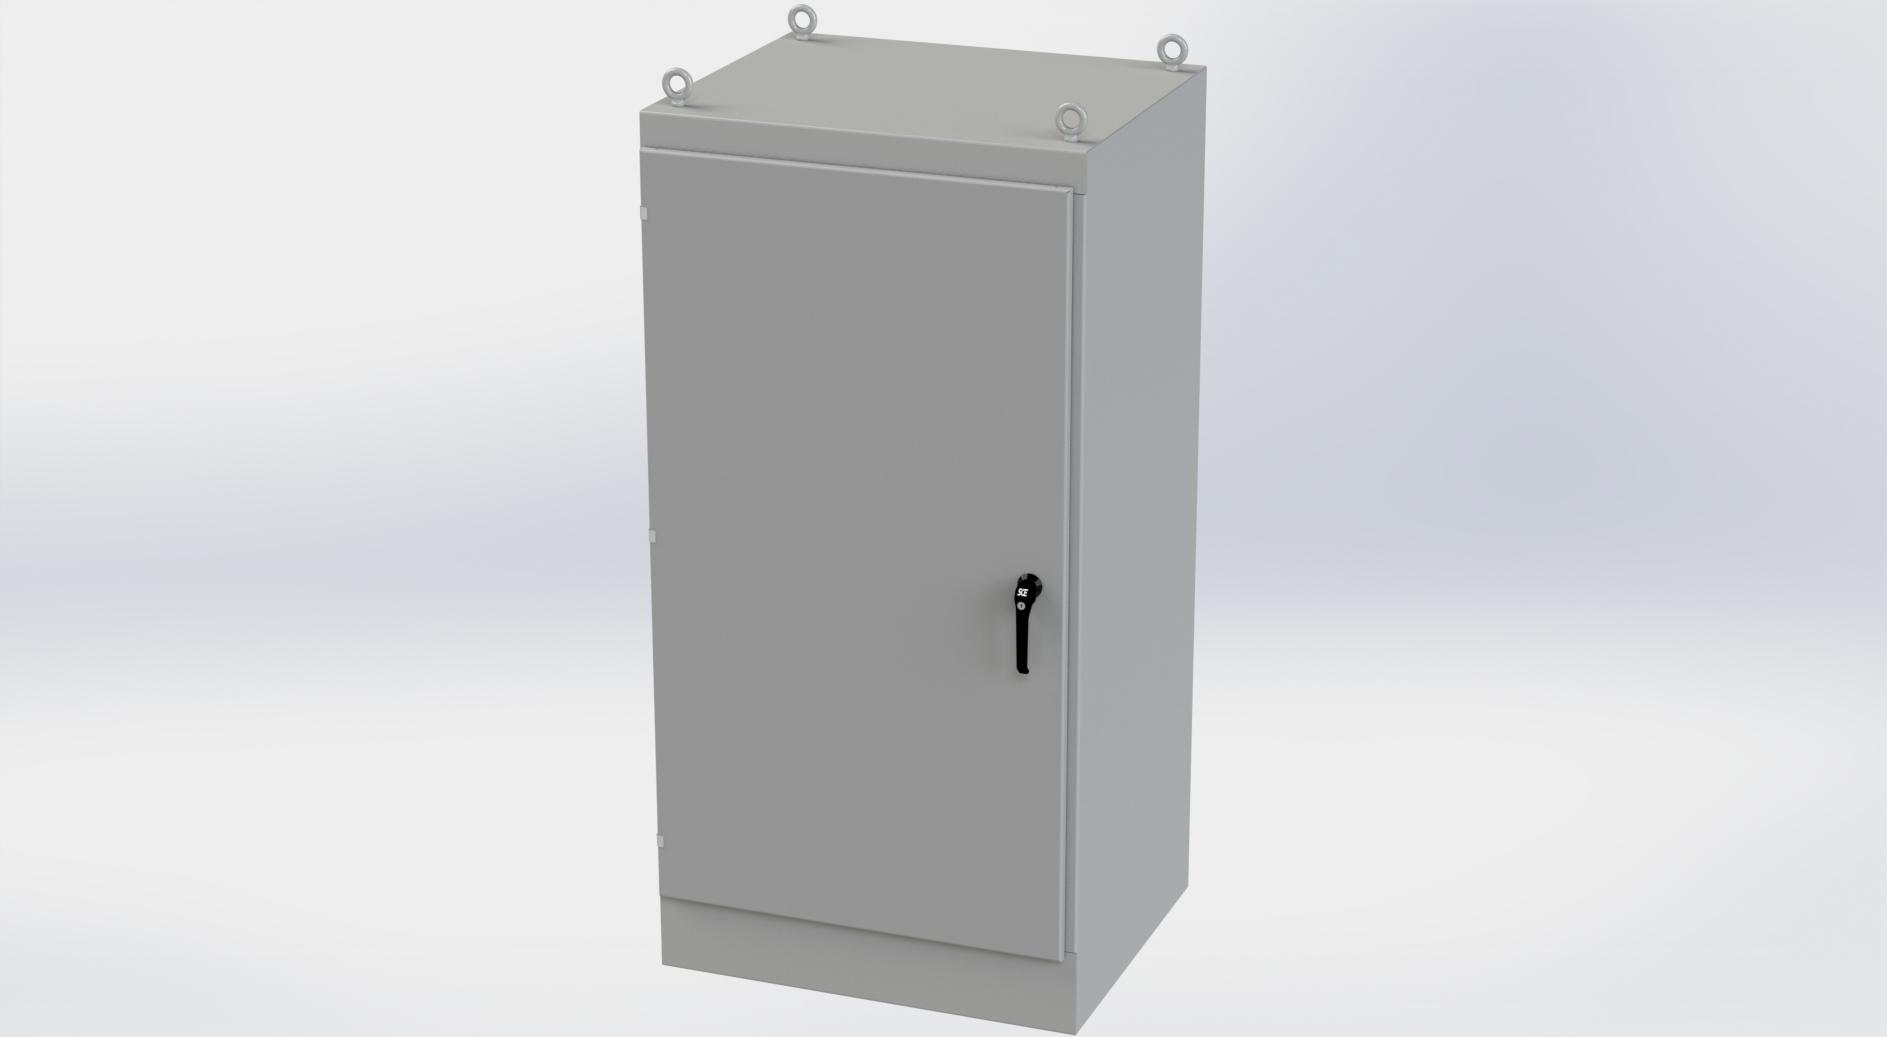 Saginaw Control SCE-723630FS FS Enclosure, Height:72.00", Width:36.00", Depth:30.00", ANSI-61 gray powder coat inside and out. Optional sub-panels are powder coated white.